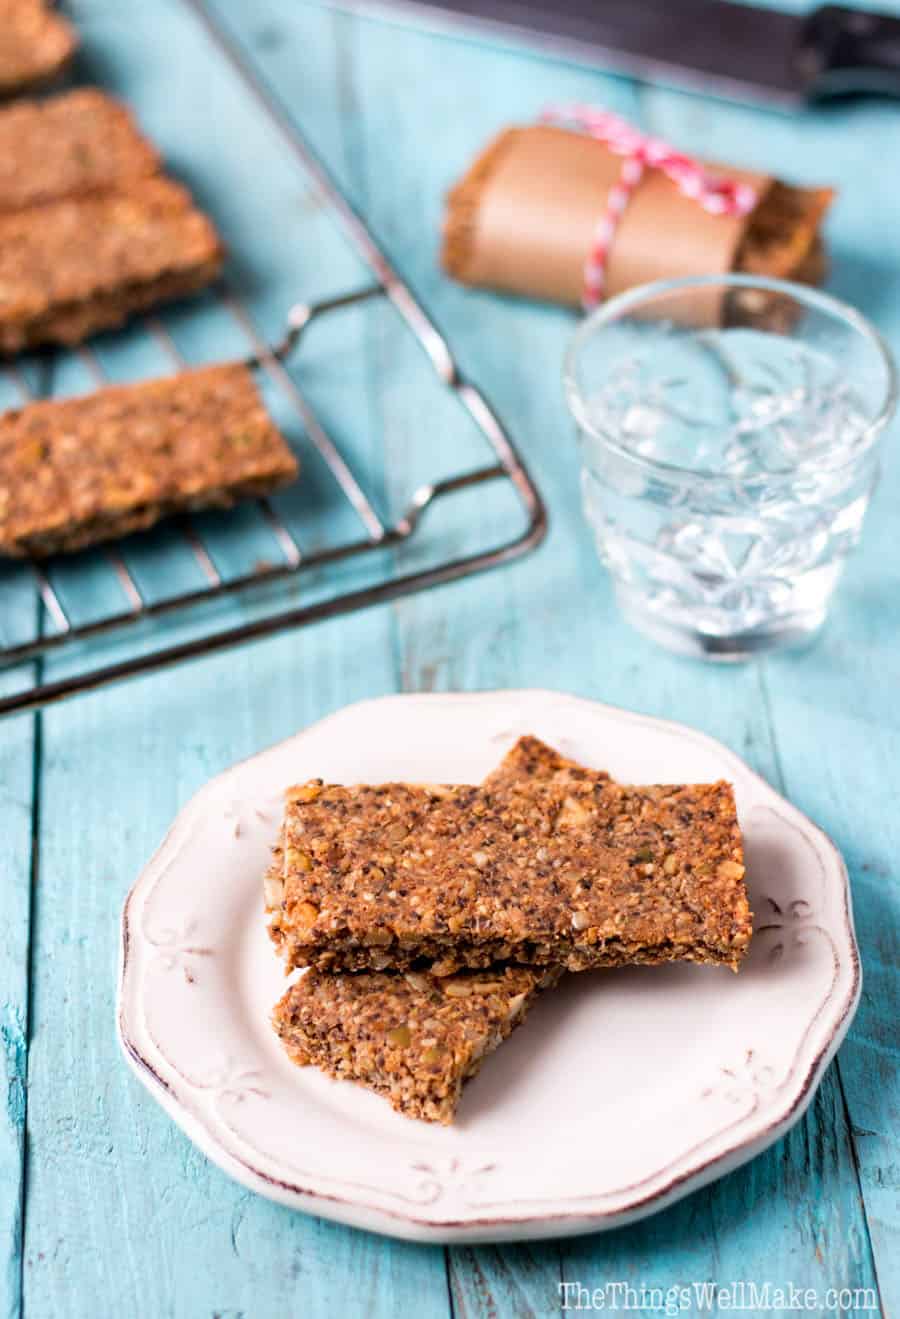 These crunchy energy nut bars are easy to make and store well for when you need a quick, healthy snack on-the-go. I call them paleo granola bars, and the recipe is grain free and highly customizable to suit your taste.